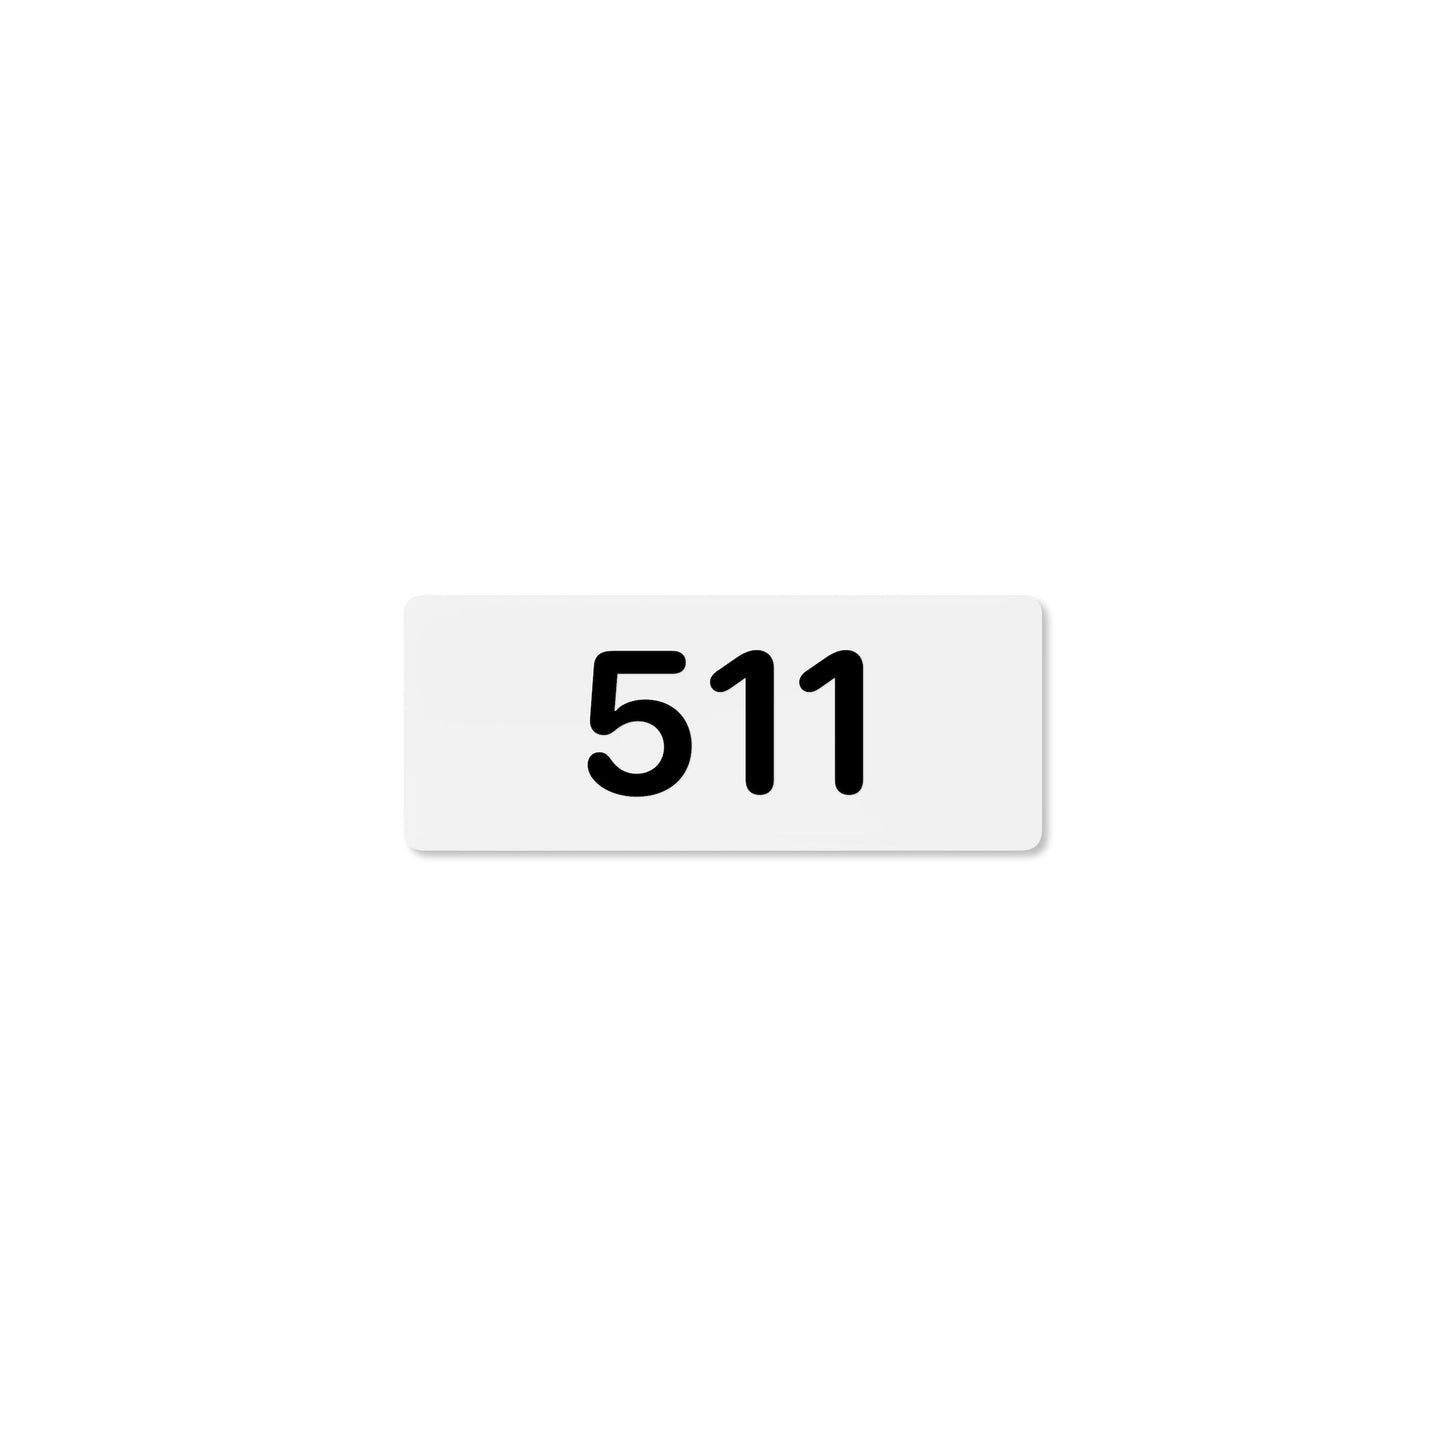 Numeral 511